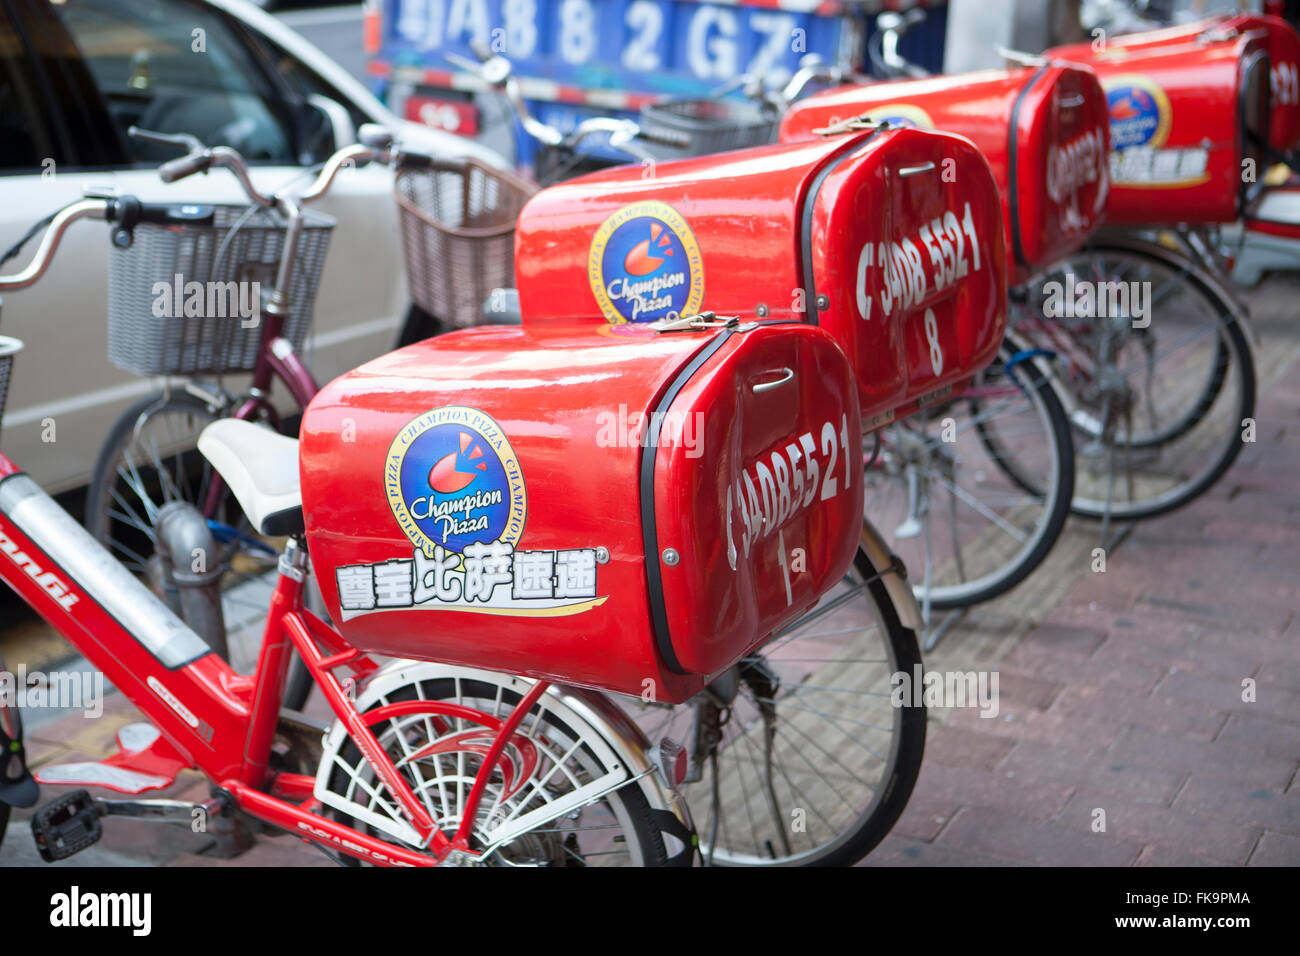 Pizza Delivery Bikes High Resolution Stock Photography and Images - Alamy